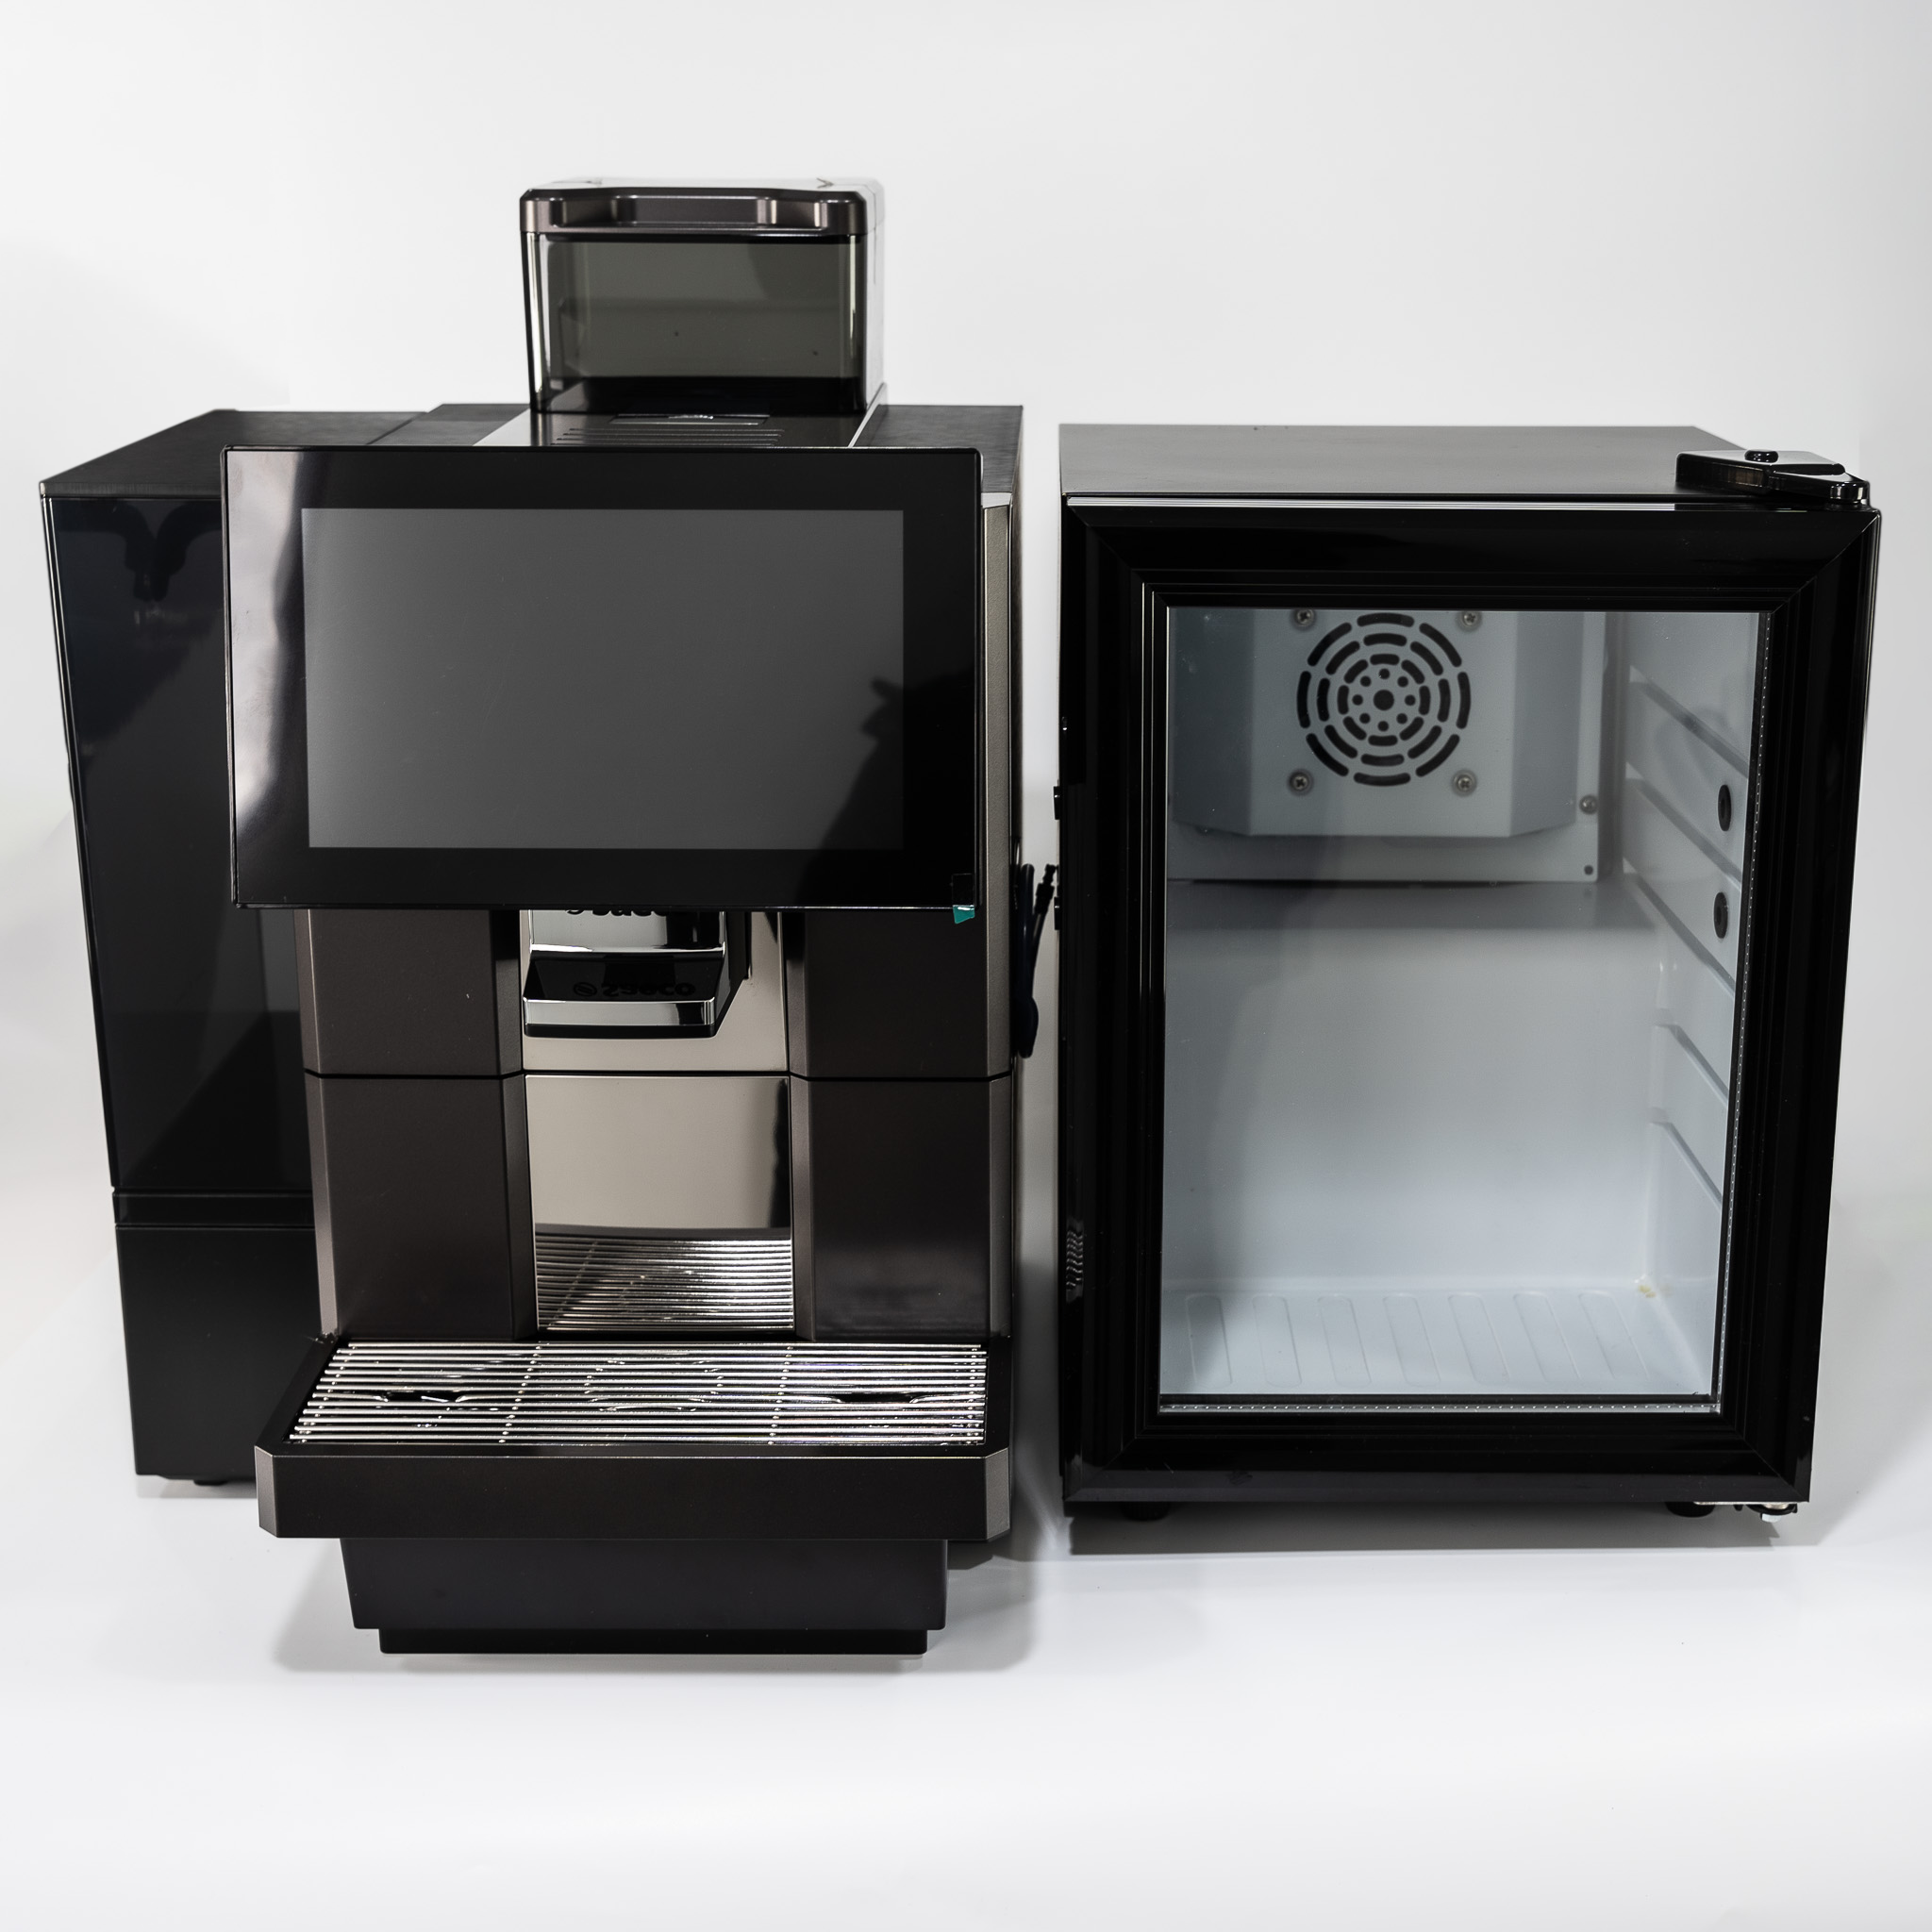 Saeco SE180 and Precision Fridge Package